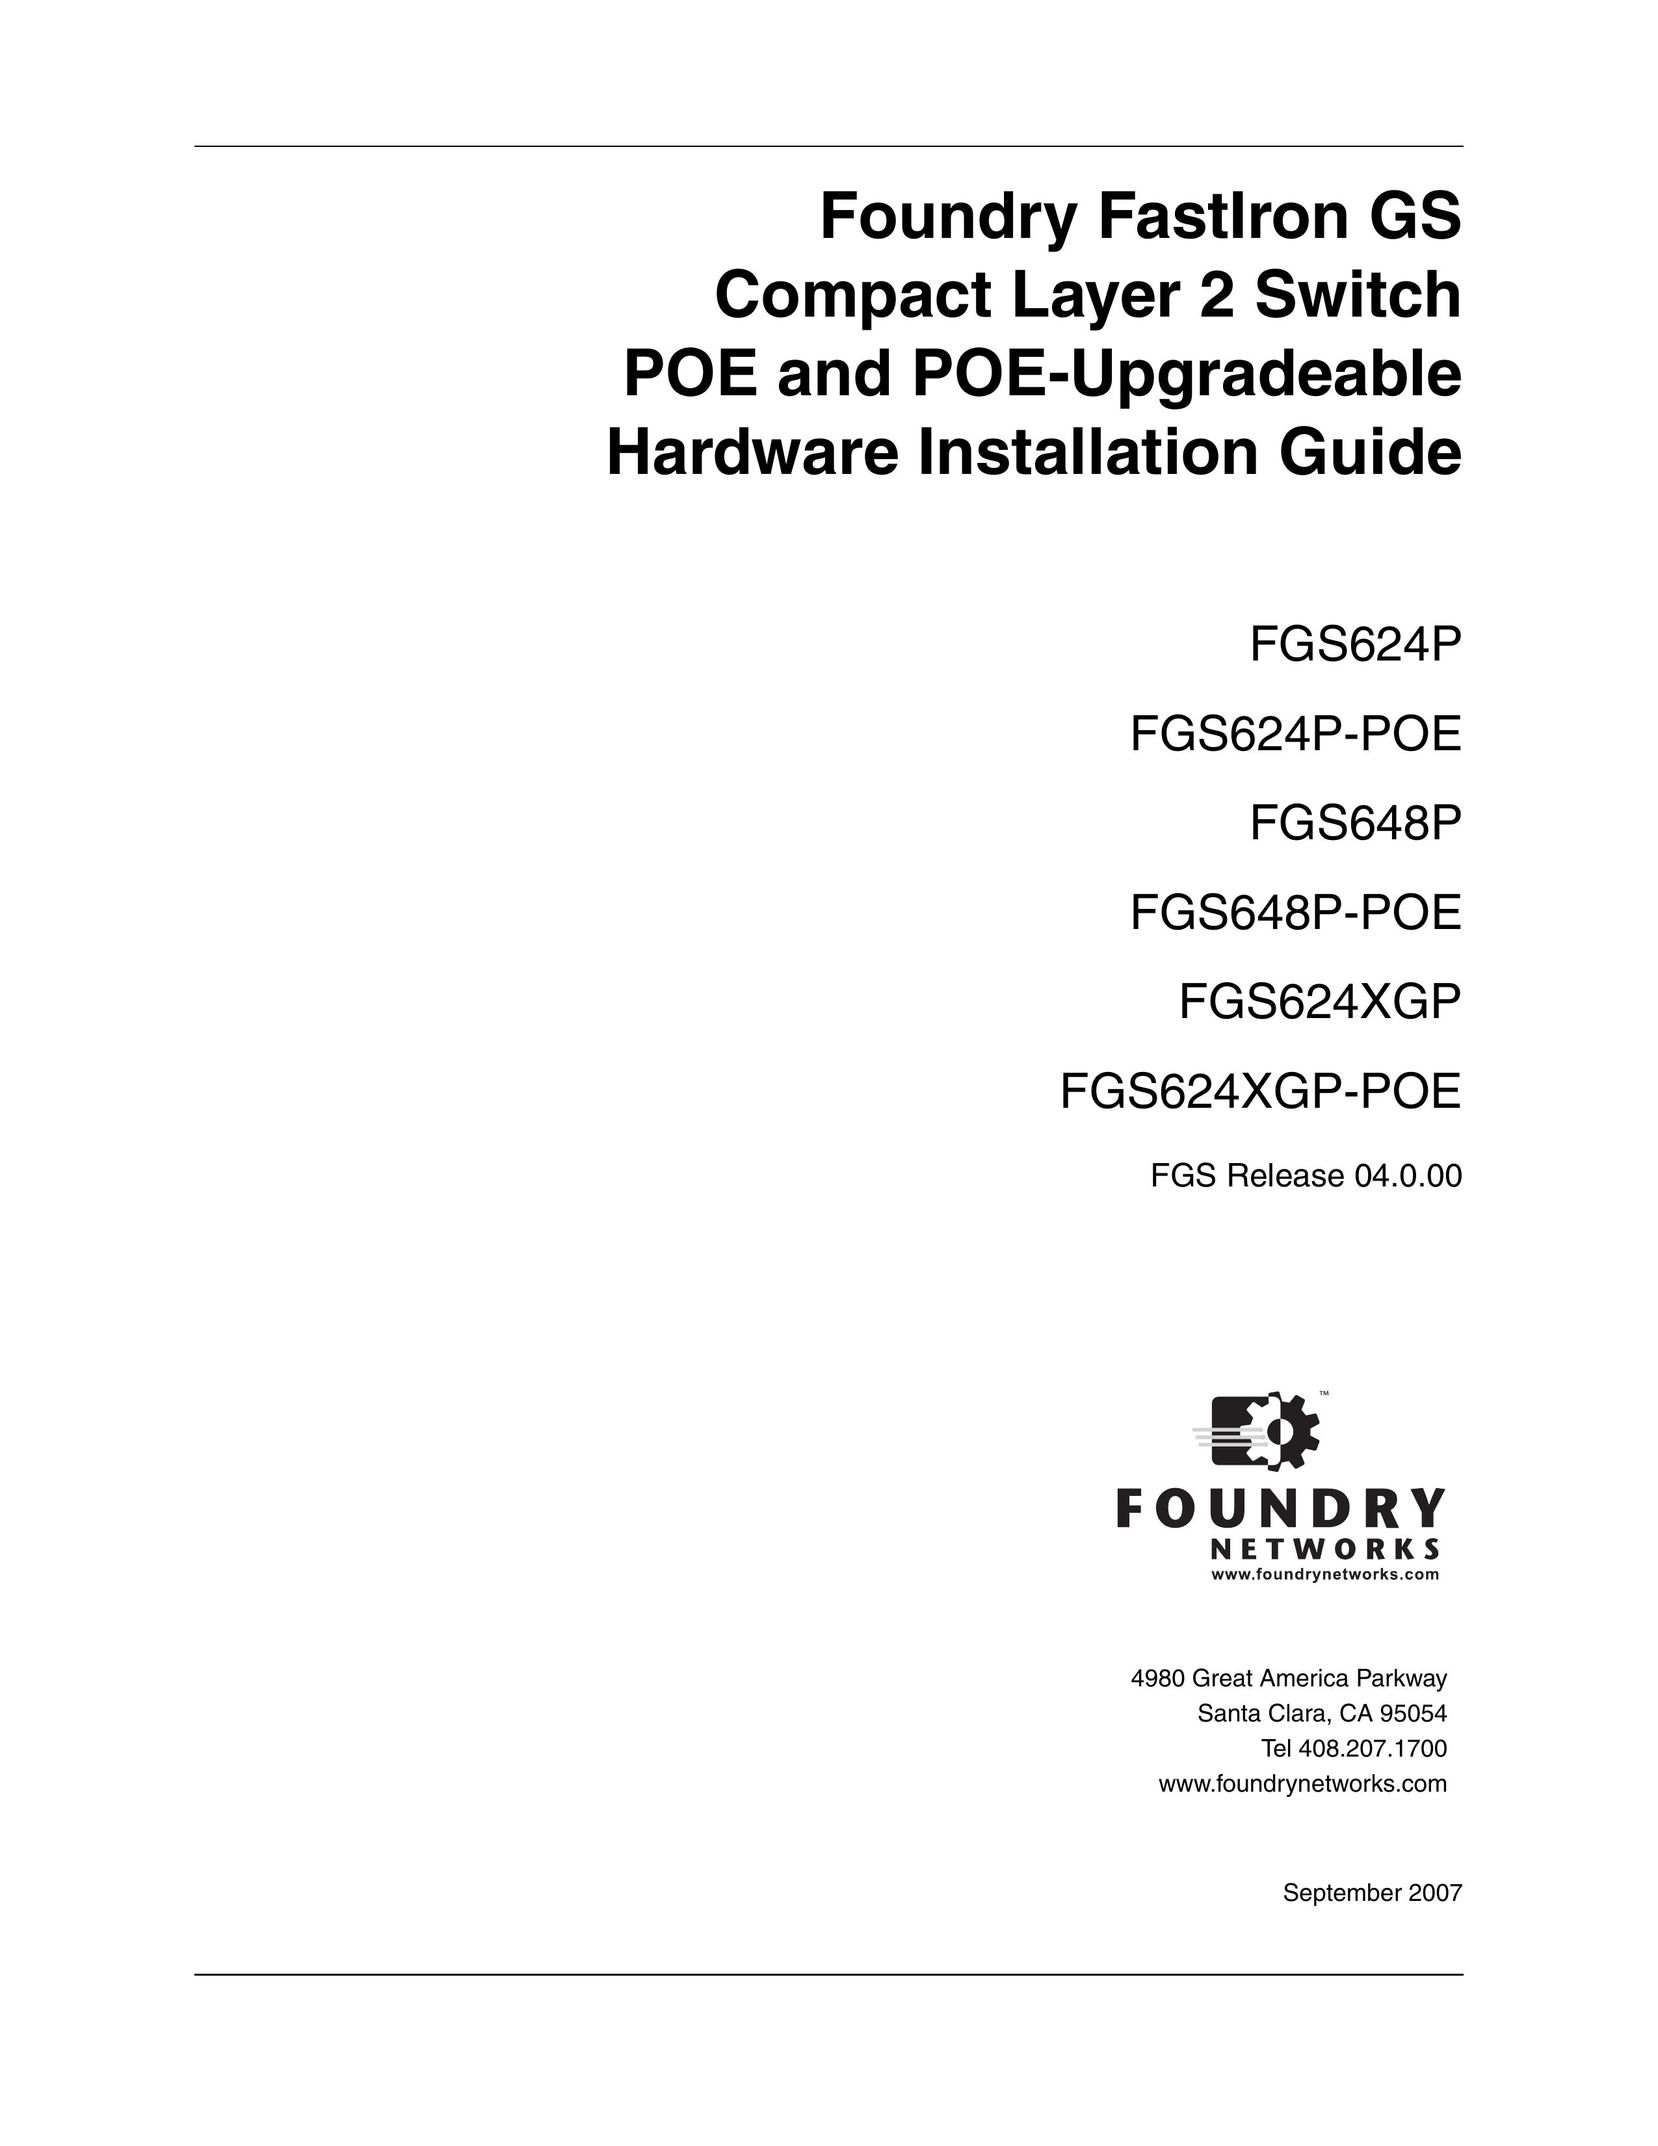 Foundry Networks FGS648P-POE Network Hardware User Manual